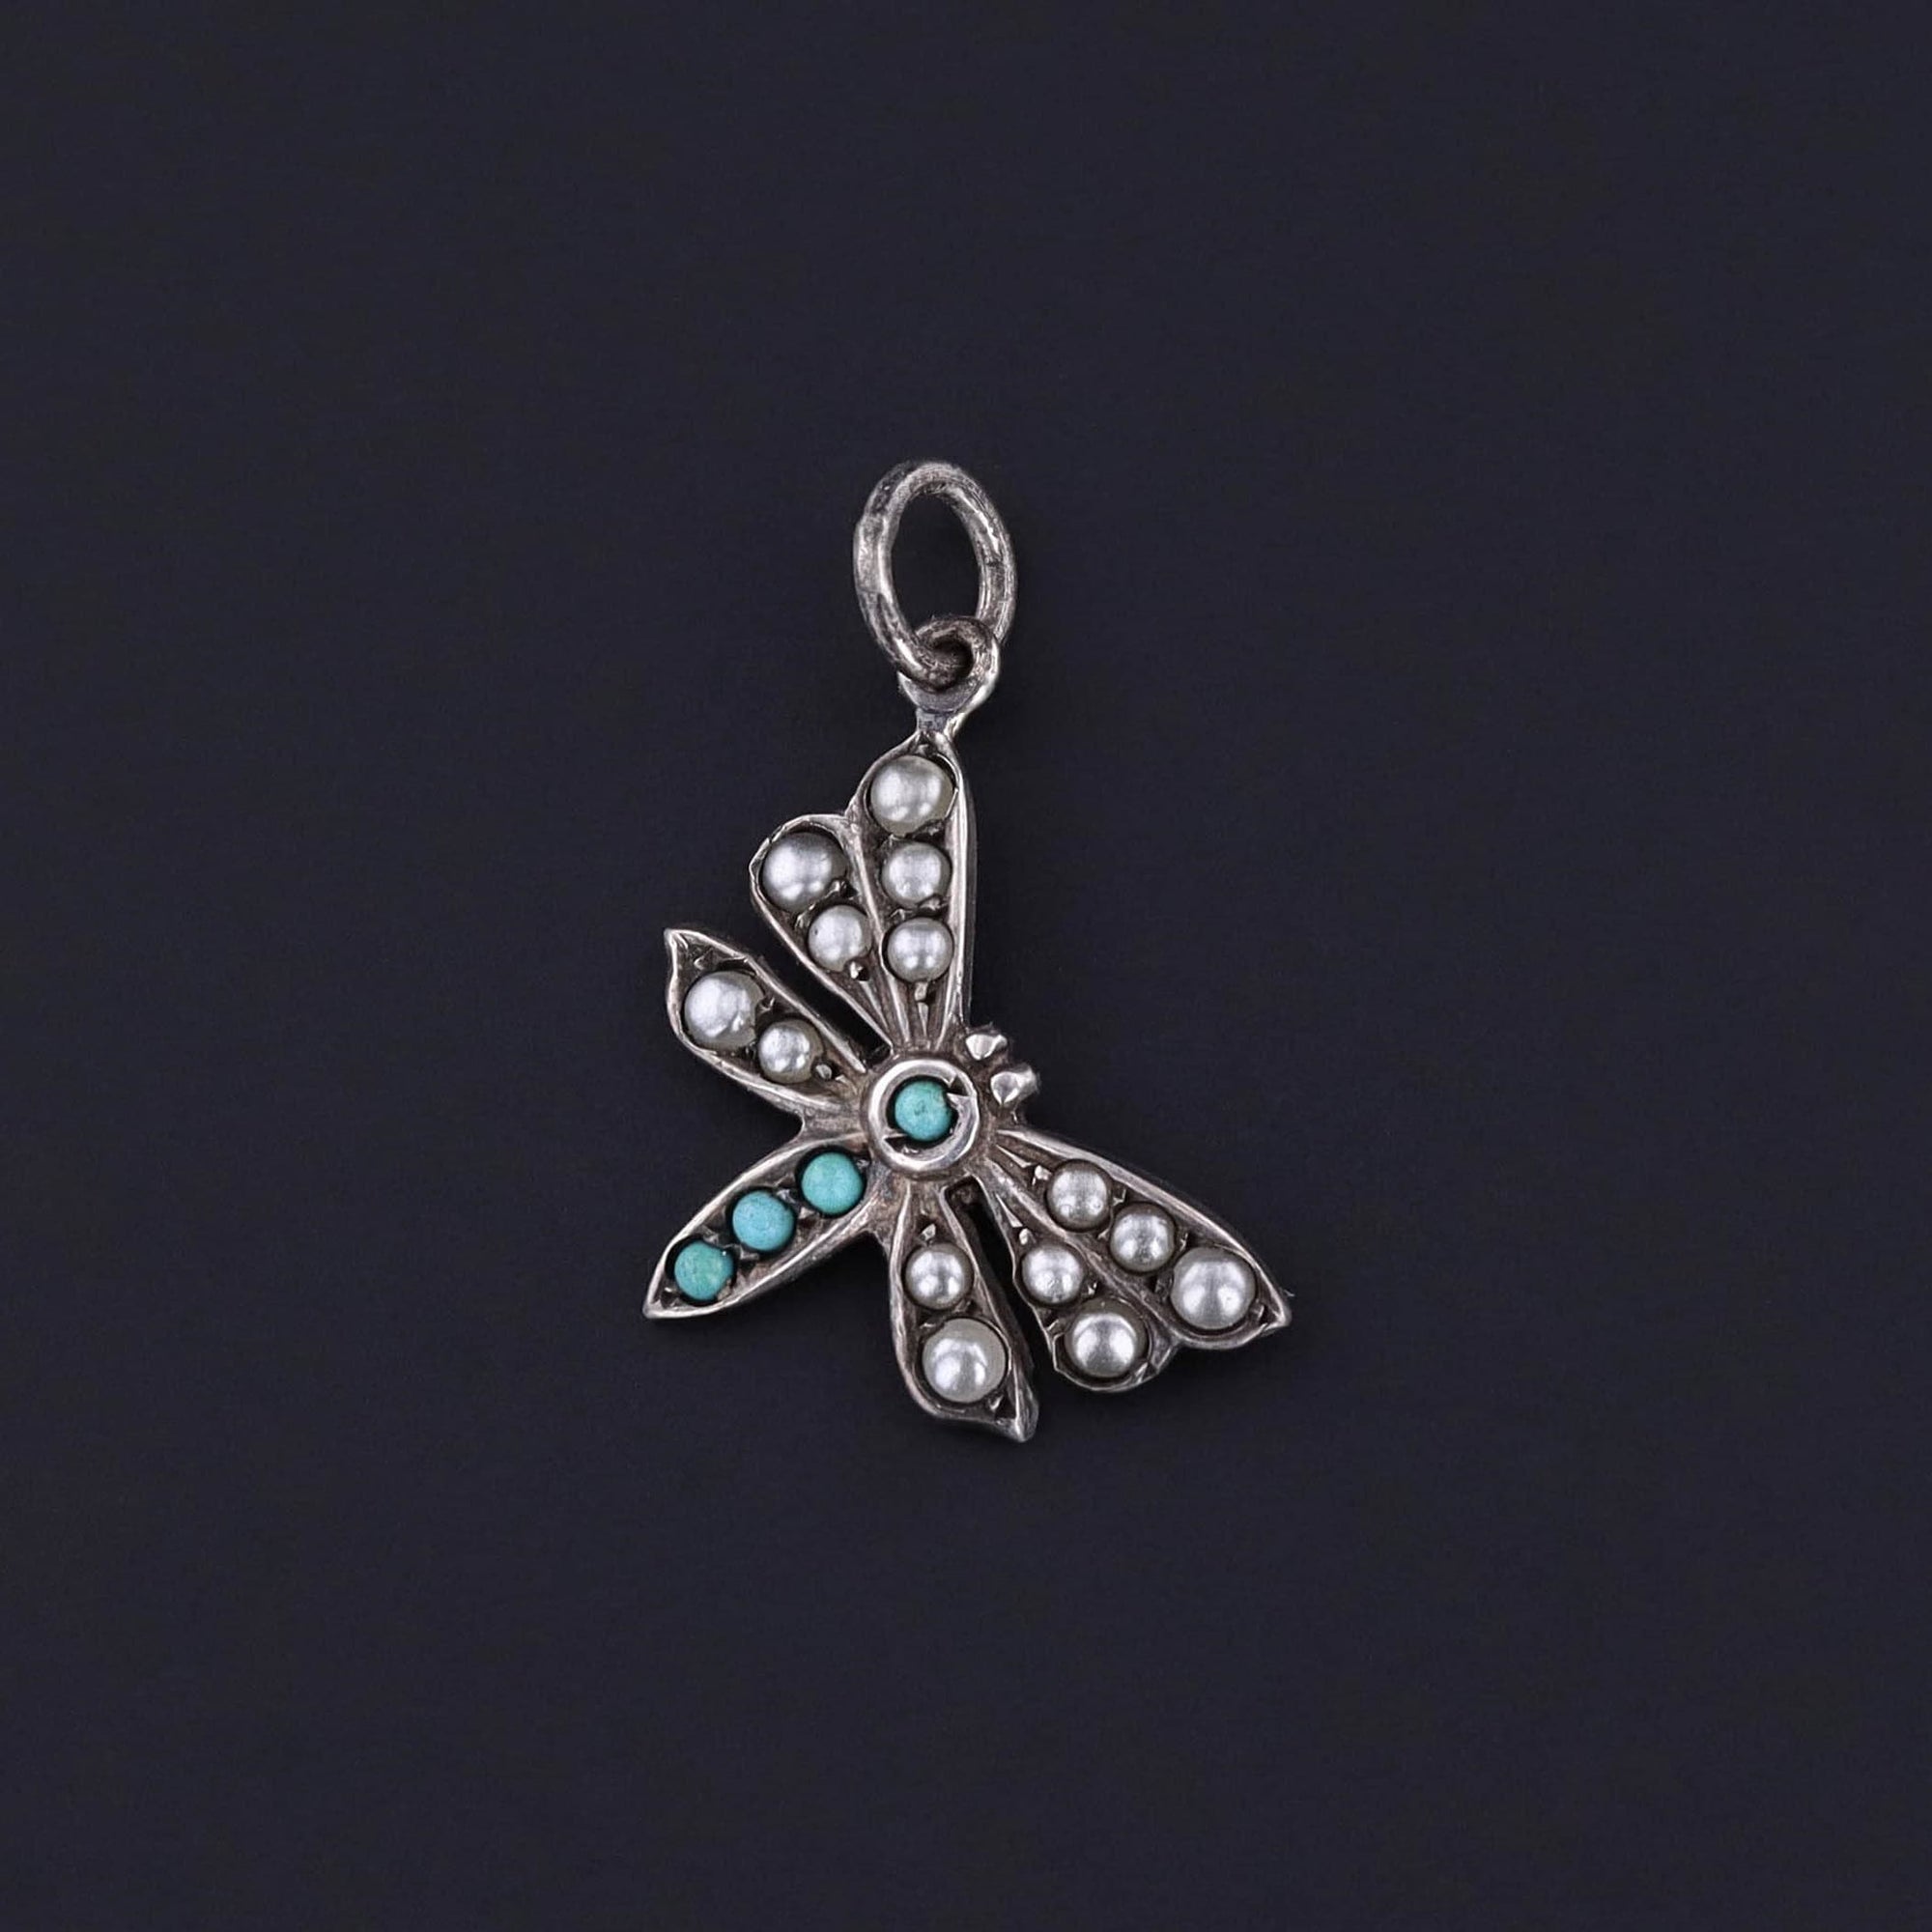 A vintage butterfly pendant adorned with simulated pearls and turquoise set in sterling silver. It was originally a 1970s pin.